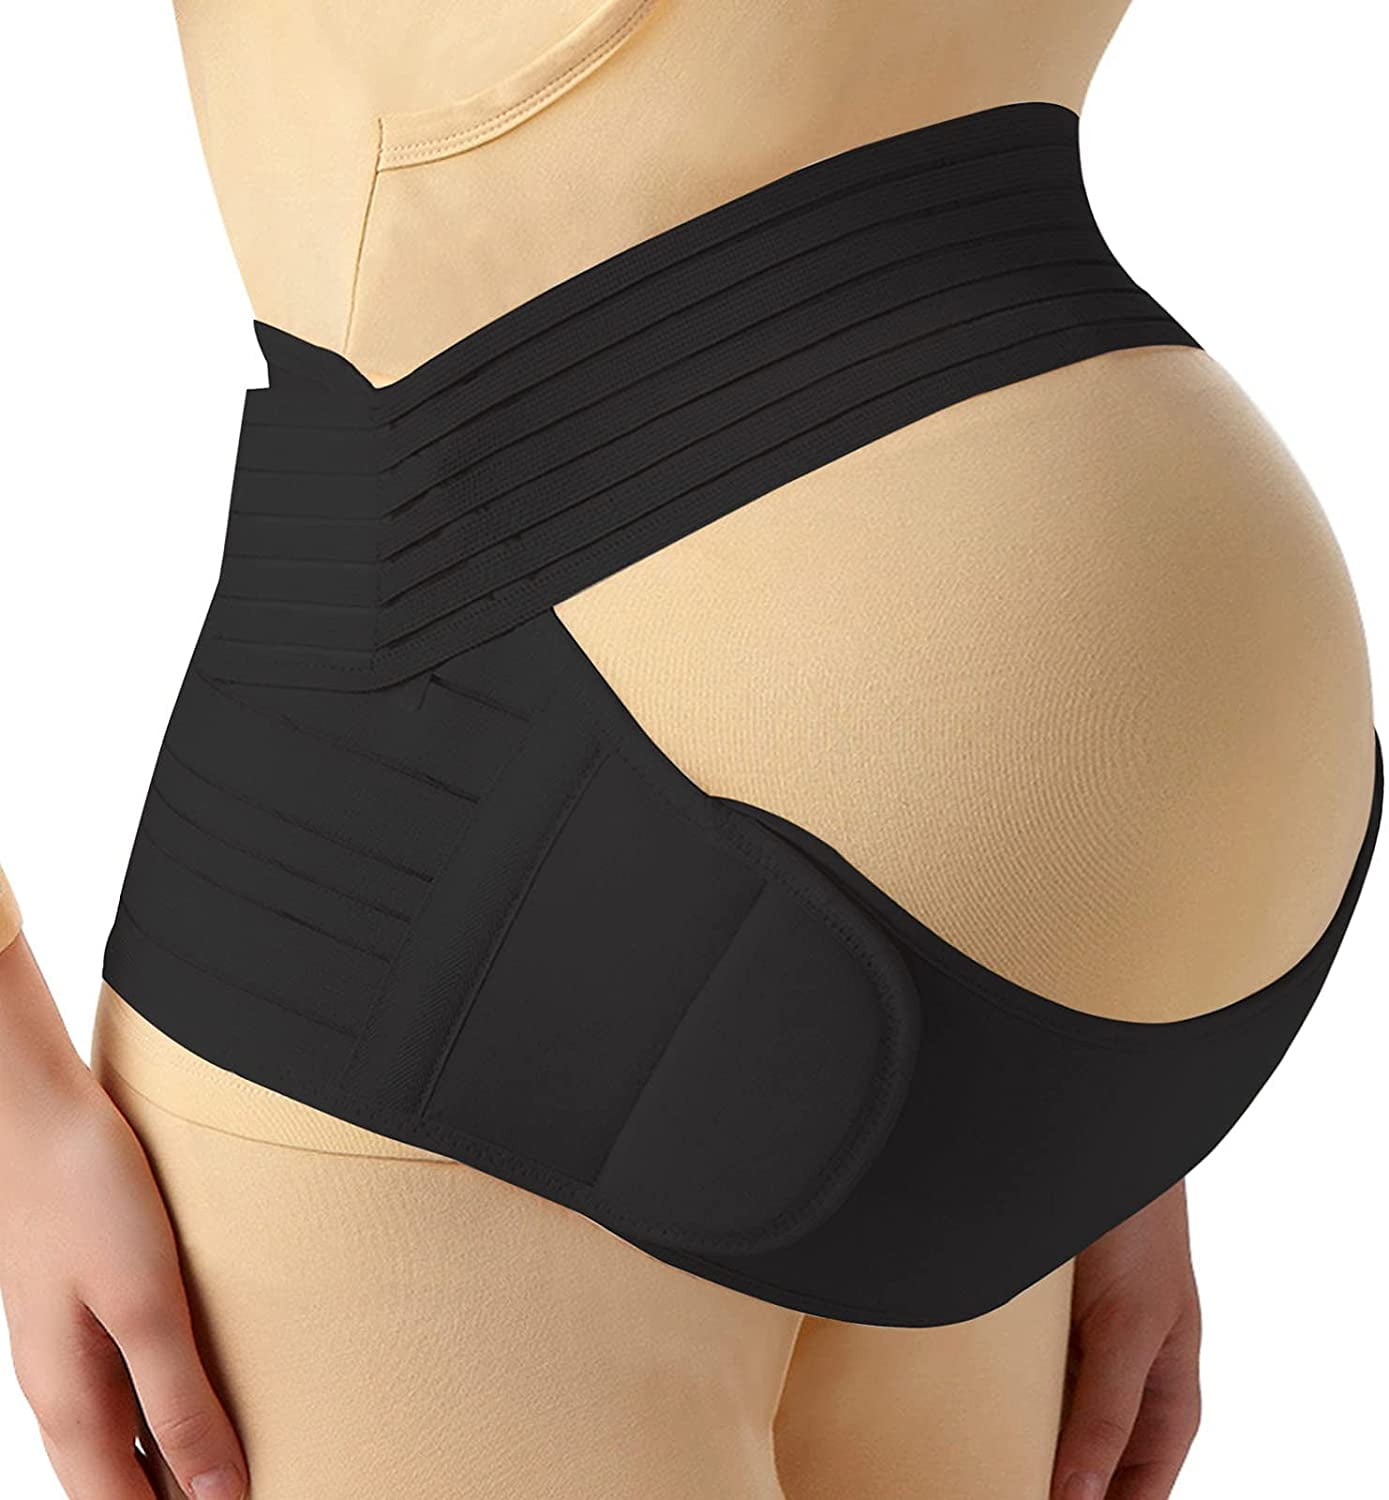 llfioreemio Pregnancy Belt, 3-in-1 Maternity Belt Pregnancy Support Band  with Belly Band for Pain Relief and Postpartum Recovery, Lightweight